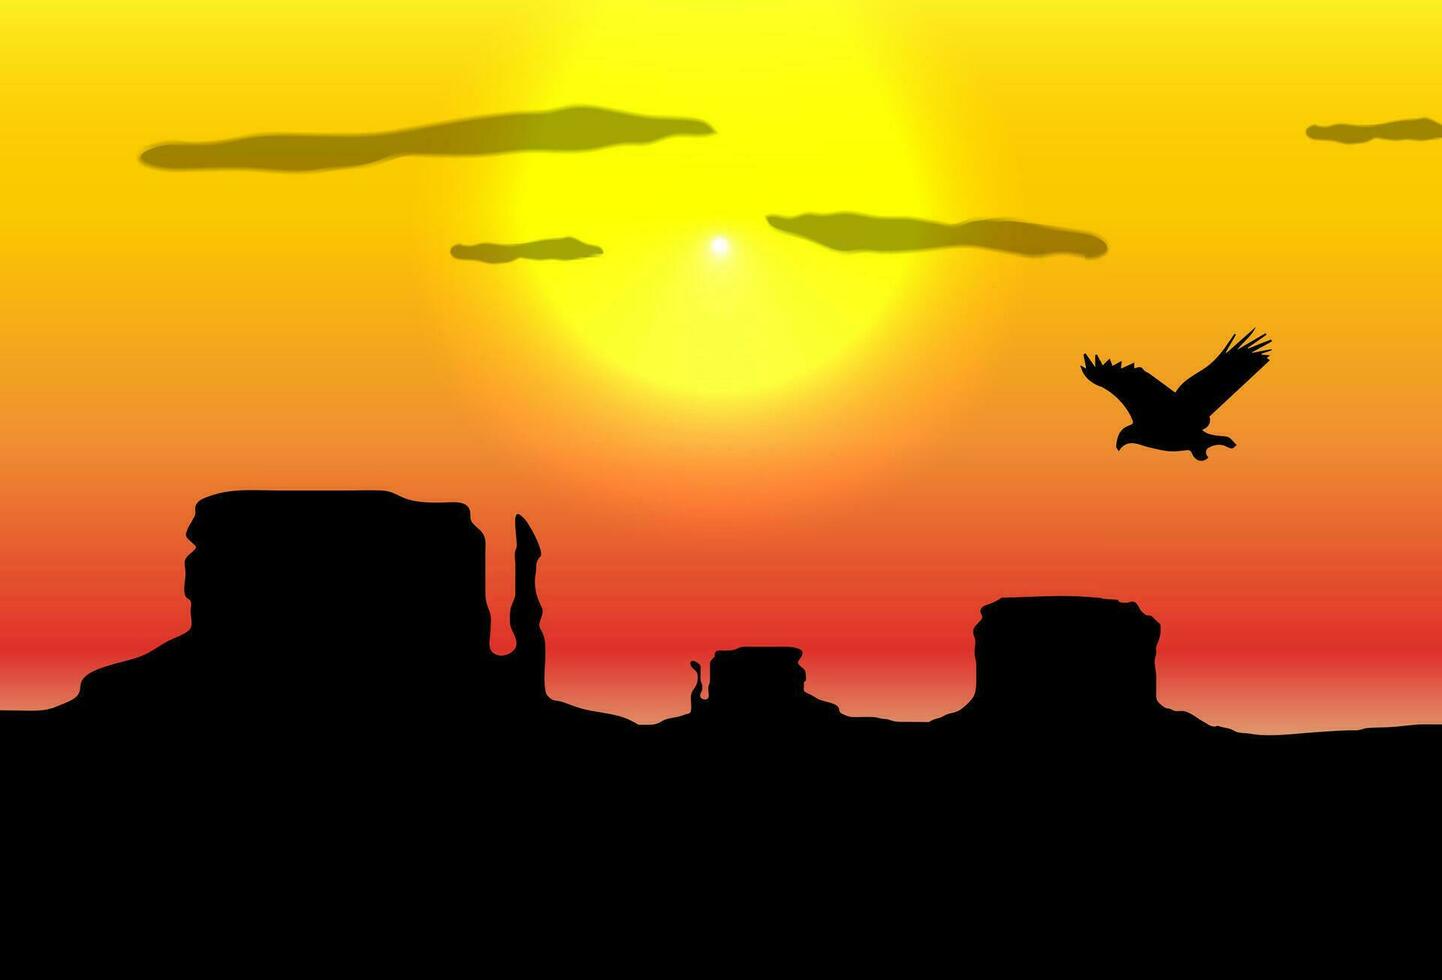 Western desert background. Rocks silhouettes. Sun and flying eagle in the sky. vector illustration